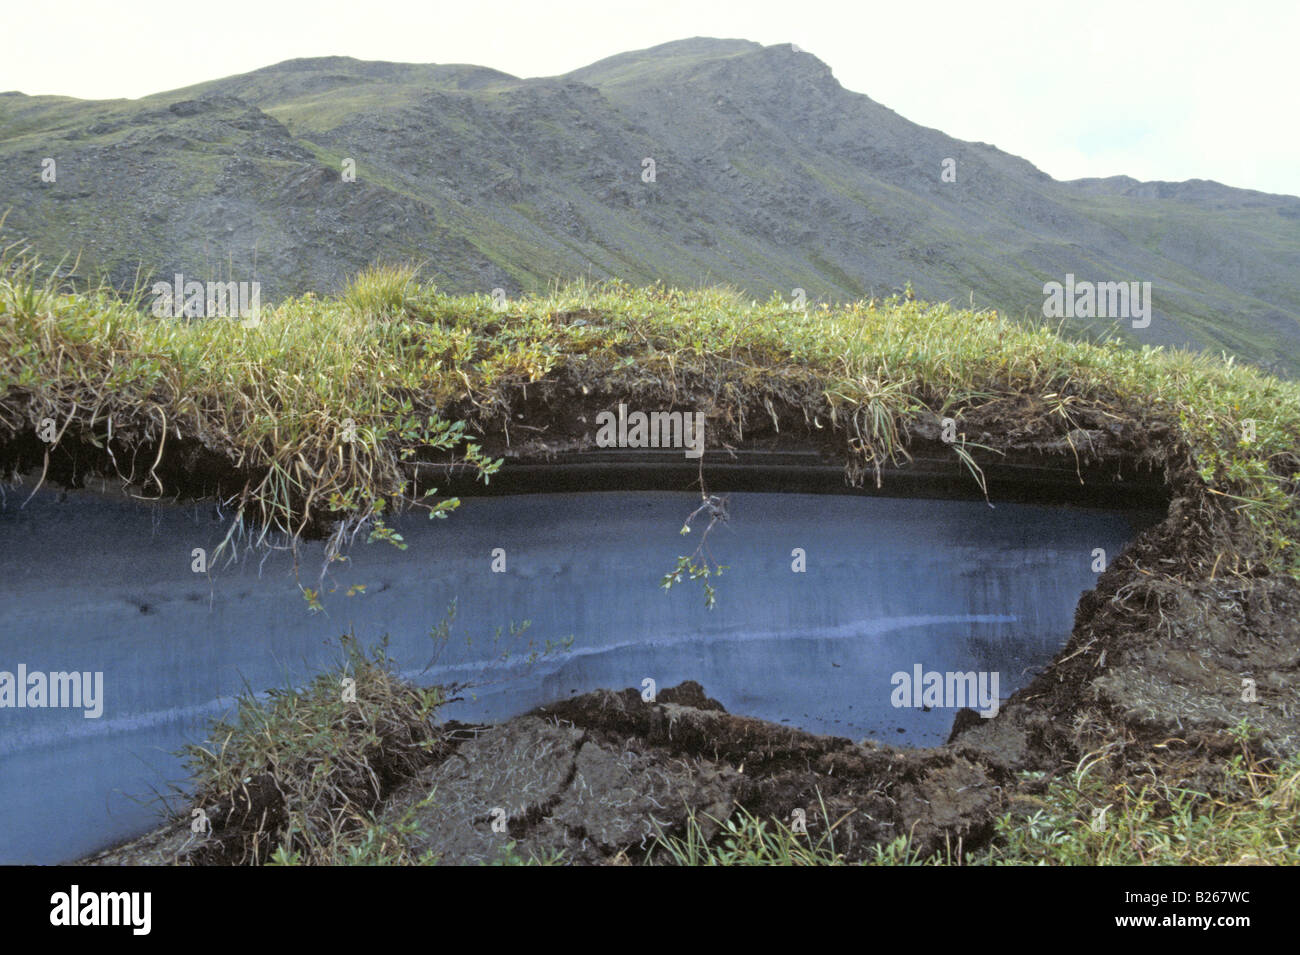 Permafrost covered by soil and vegetation Stock Photo